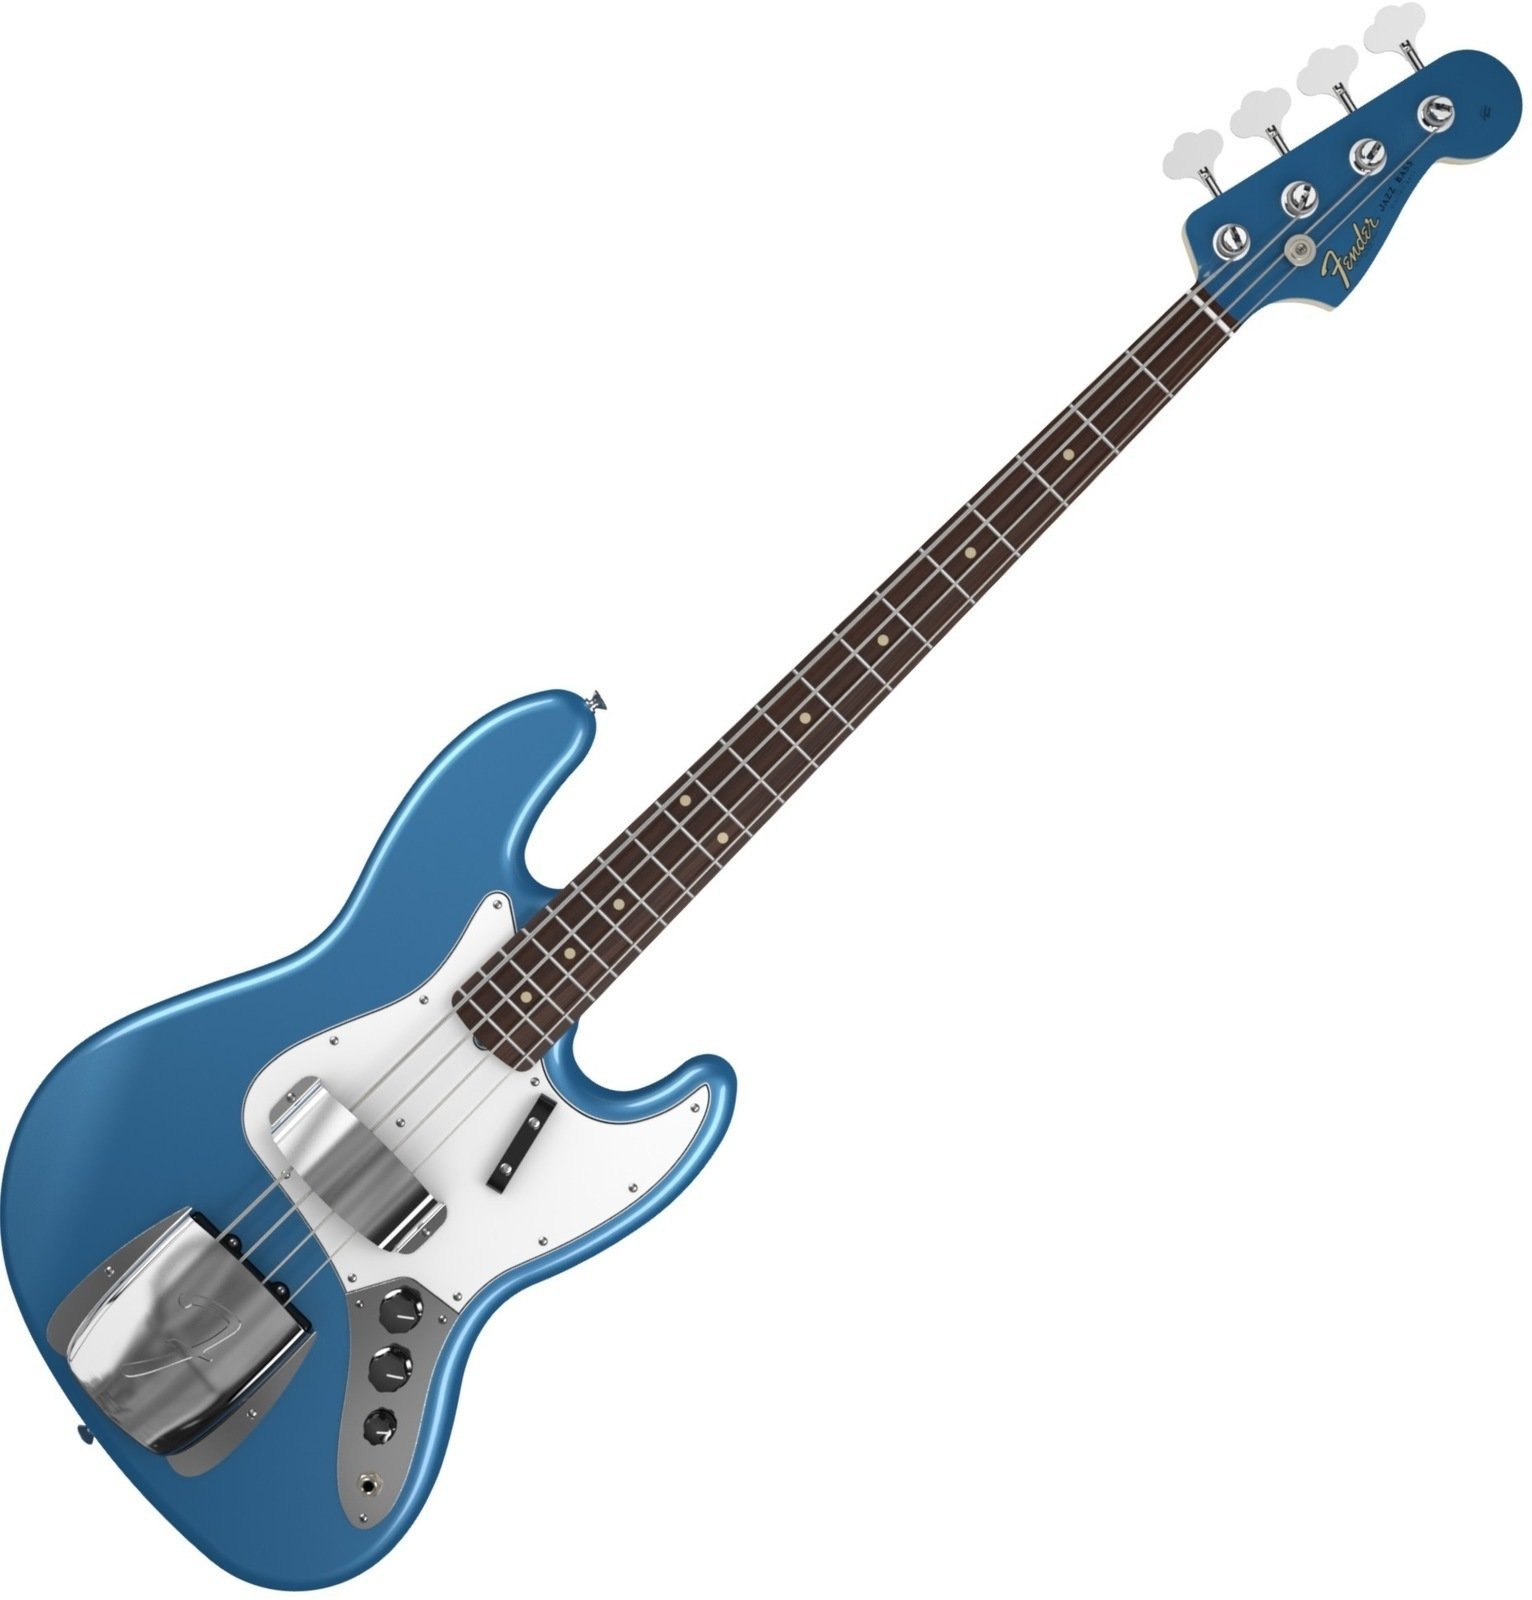 E-Bass Fender American Vintage '64 Jazz Bass, Round-Laminated Rosewood Fingerboard, Lake Placid Blue